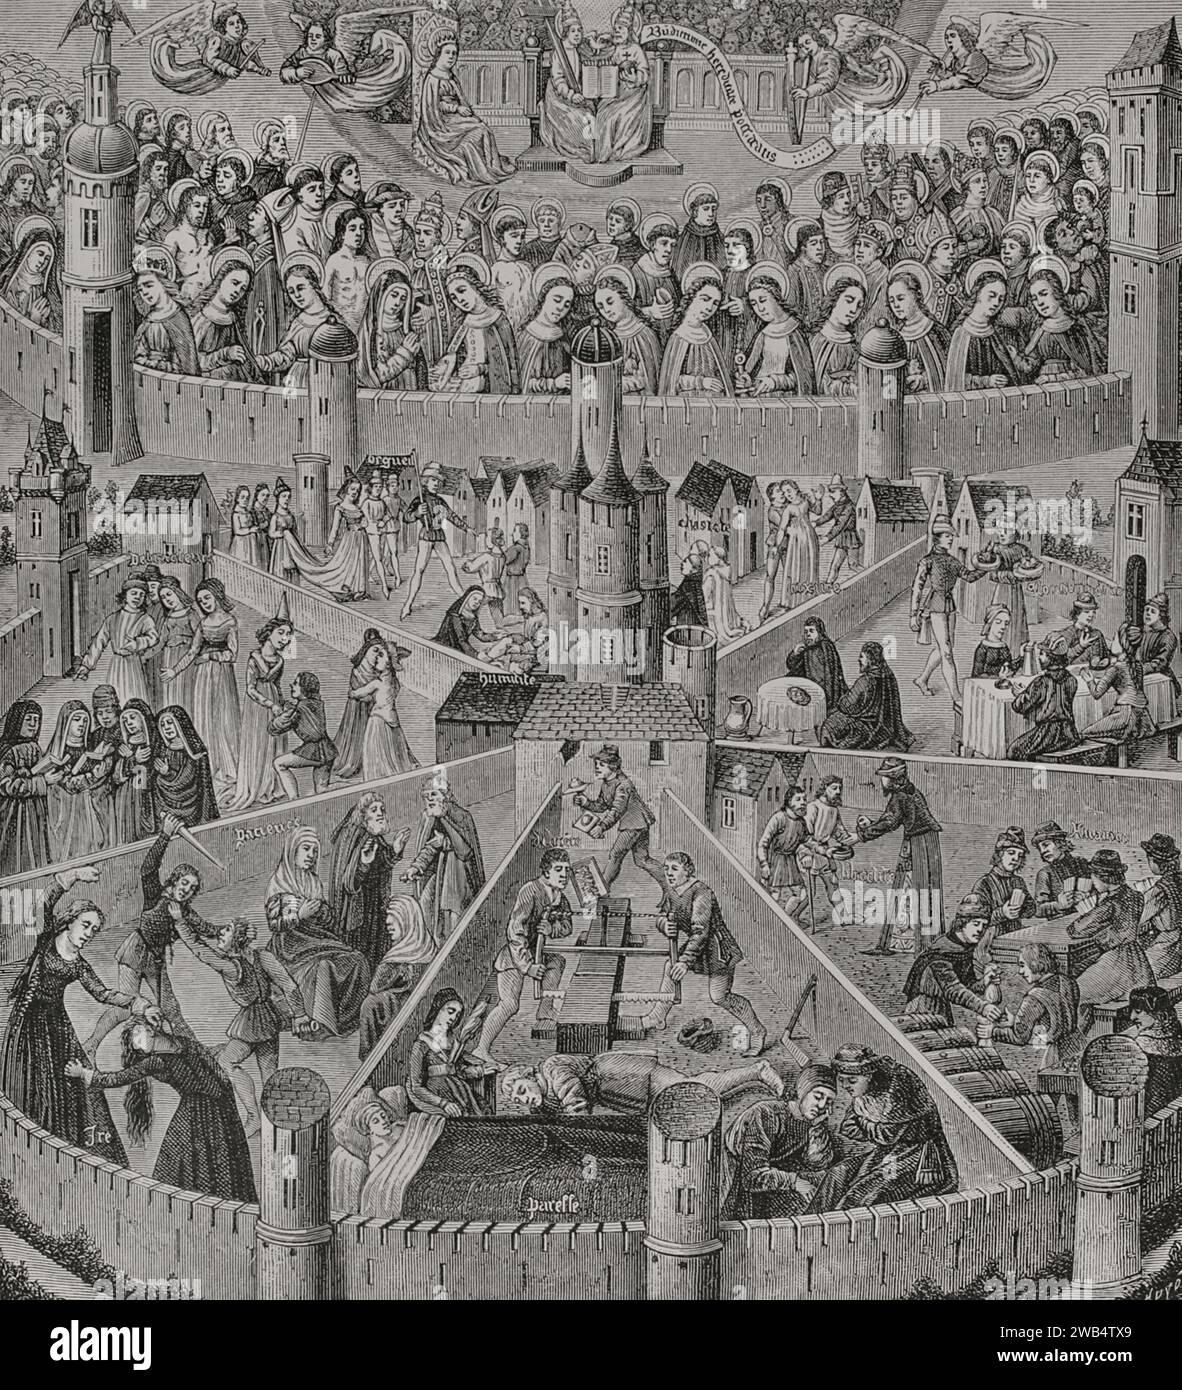 Heavenly city and earthly city. Representation of the 'City of God' as imagined by St. Augustine. The upper part with the saints already welcomed into heaven. The seven lower compartments show those who are preparing themselves, through the exercise of Christian virtues, to be part of the eternal kingdom or to be excluded from it forever because of committing the Seven Deadly Sins. Engraving by Huyot from a miniature of Saint Augustine's 'The City of God', mid-15th century. Detail. Sciences & Lettres au Moyen Age et à l'époque de la Renaissance. Paris, 1877. Stock Photo